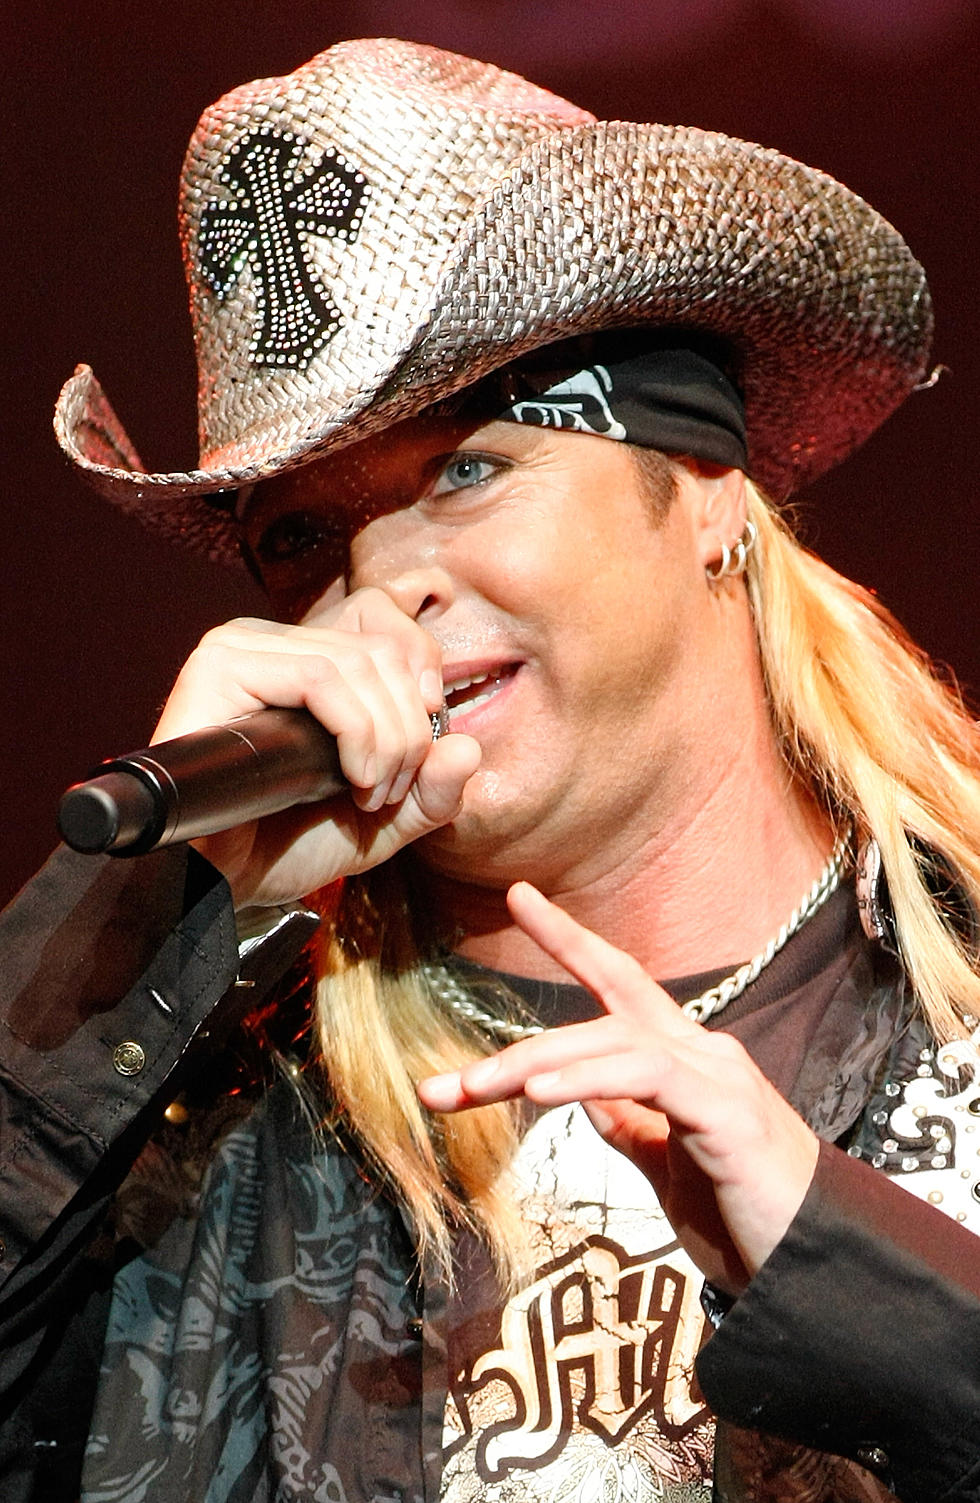 Win Tickets to See Bret Michaels at Cheyenne’s Outlaw Saloon December 30